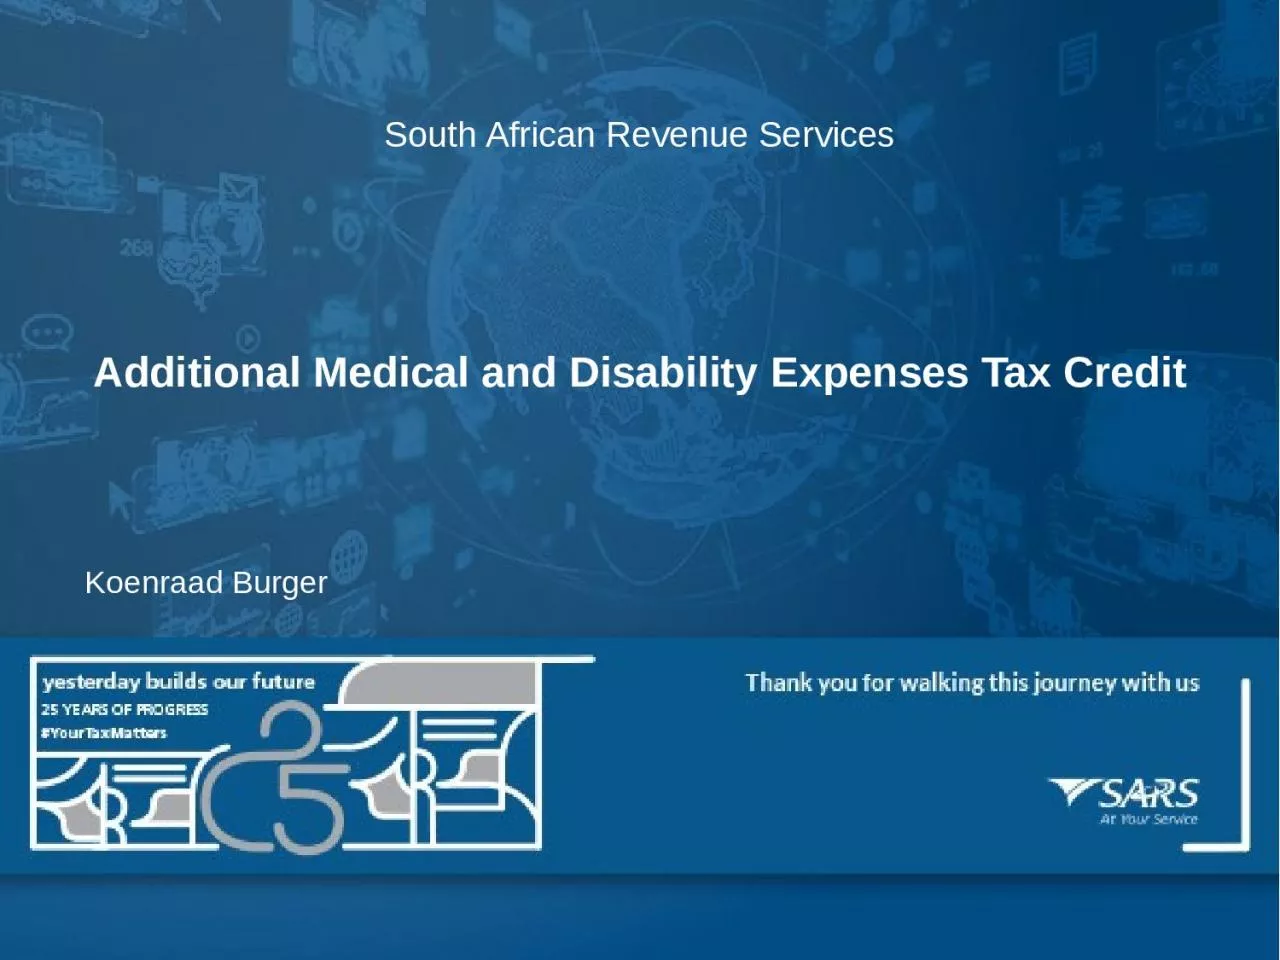 South African Revenue Services